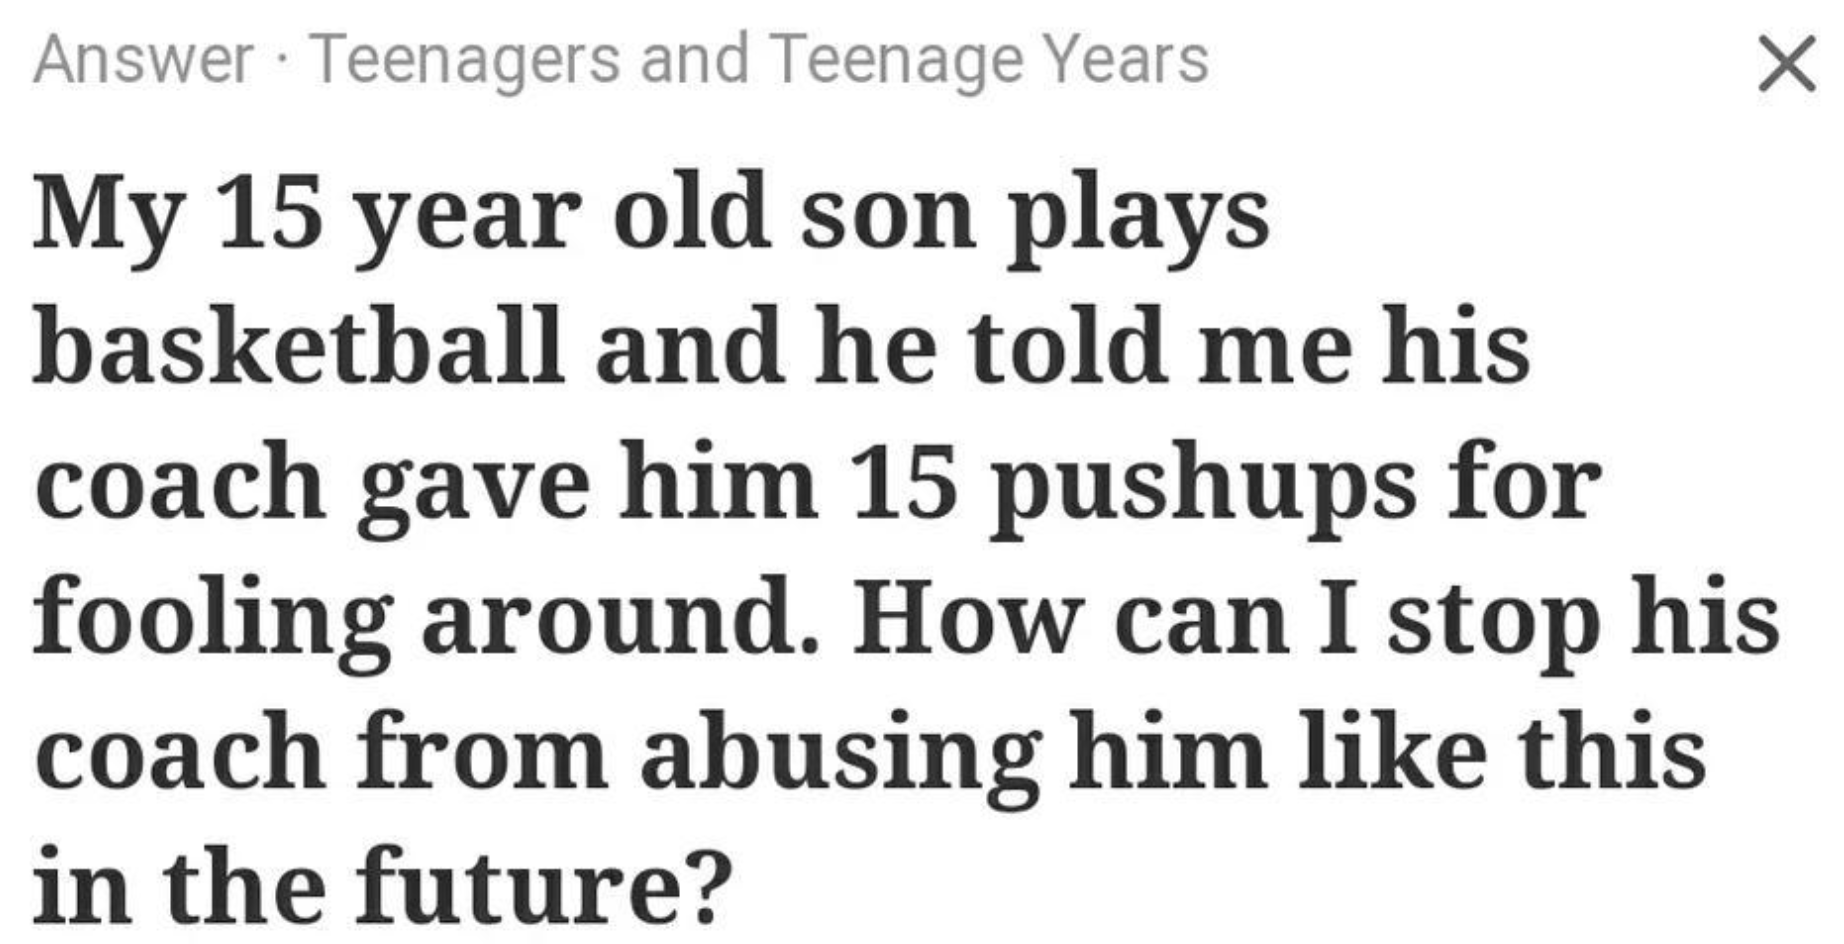 number - Answer Teenagers and Teenage Years My 15 year old son plays basketball and he told me his coach gave him 15 pushups for fooling around. How can I stop his coach from abusing him this in the future?